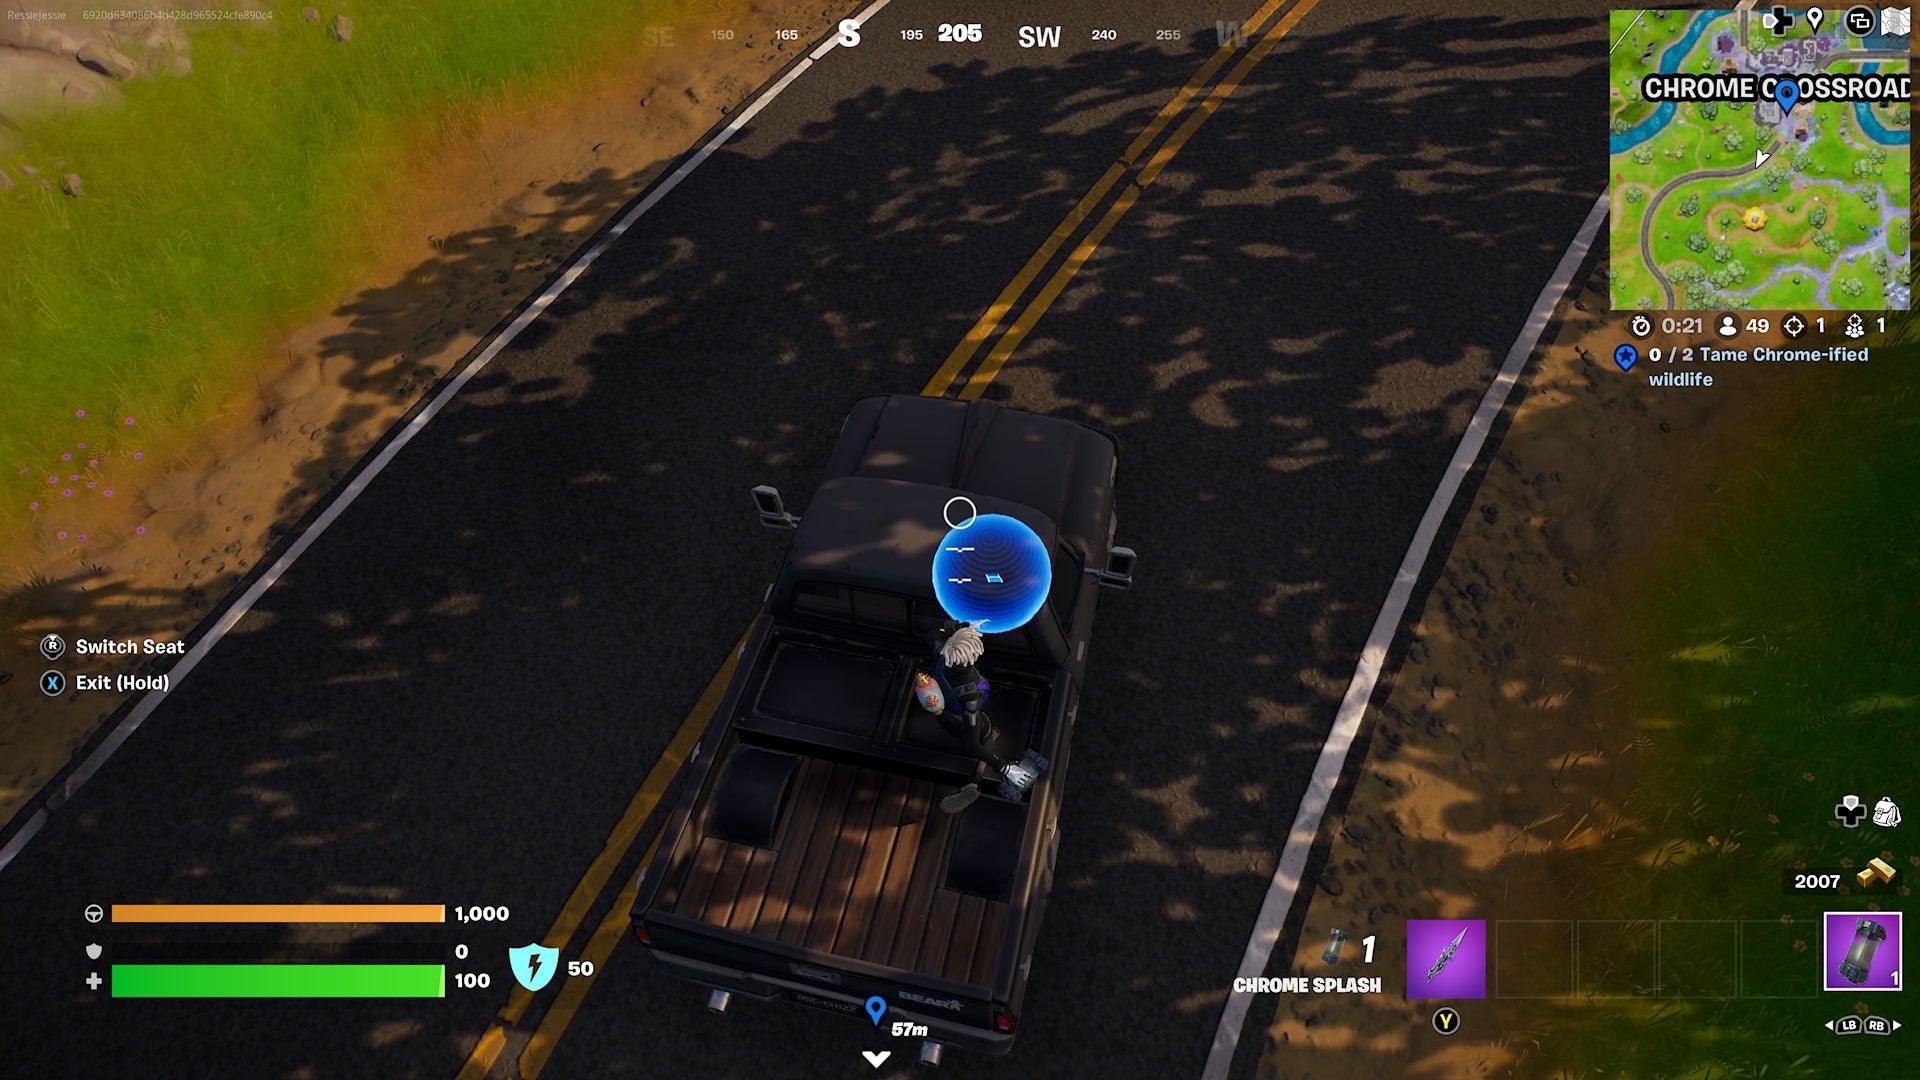 How To Get Chrome Ified While Driving In Fortnite 3